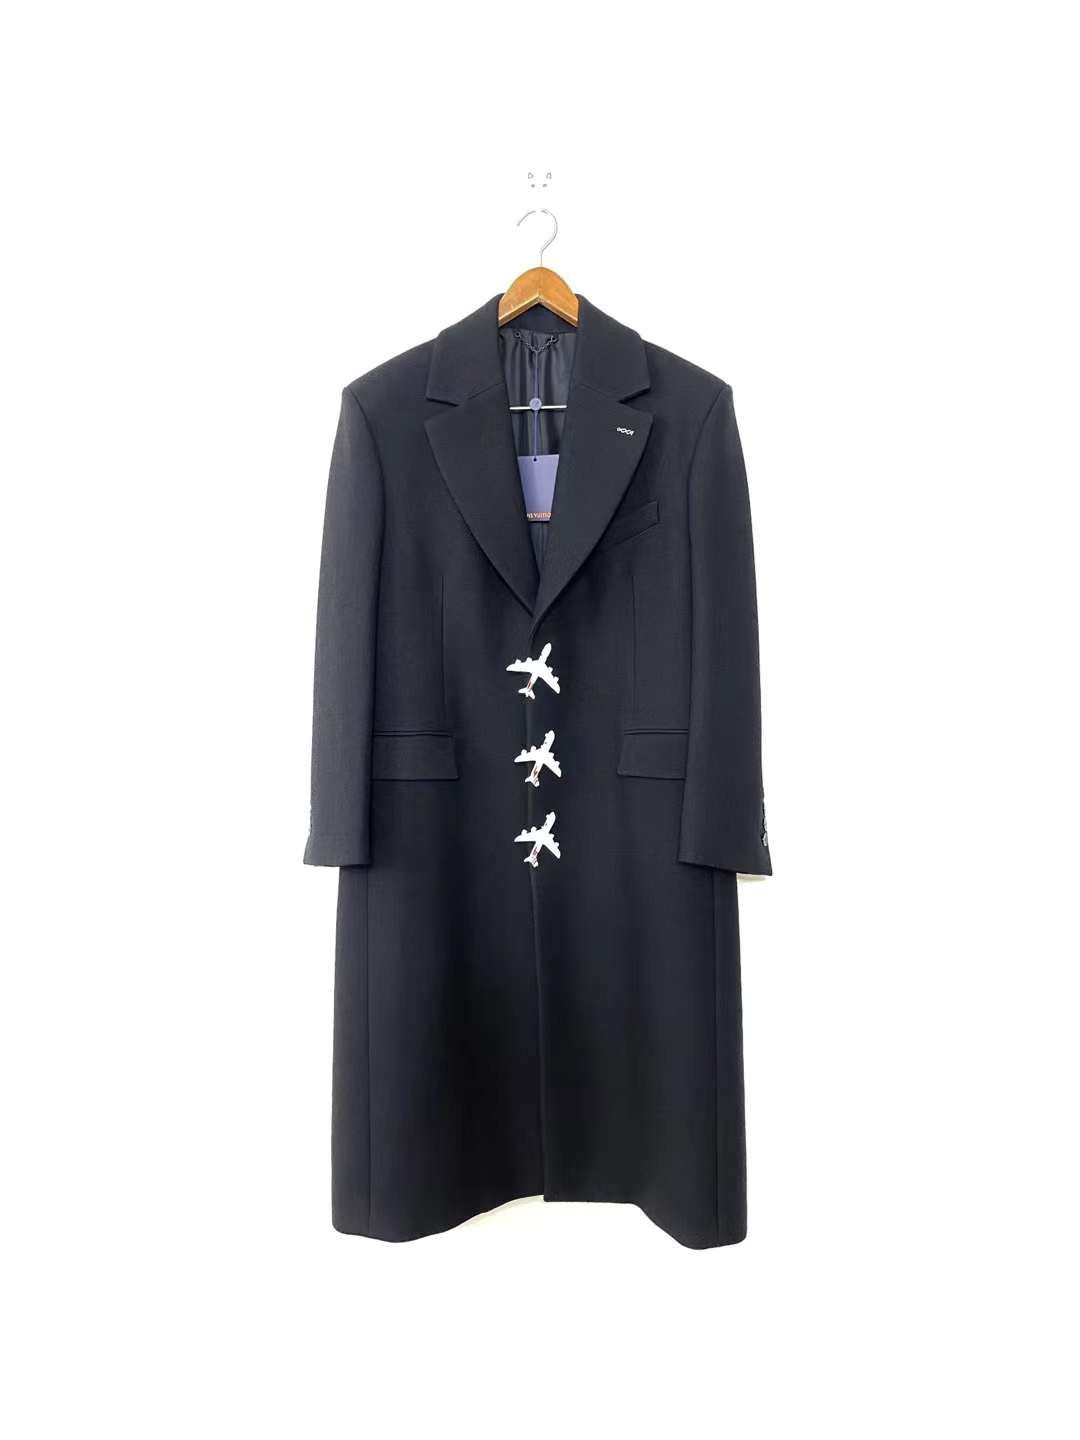 FW21 runway airplane button extra large coat - 2